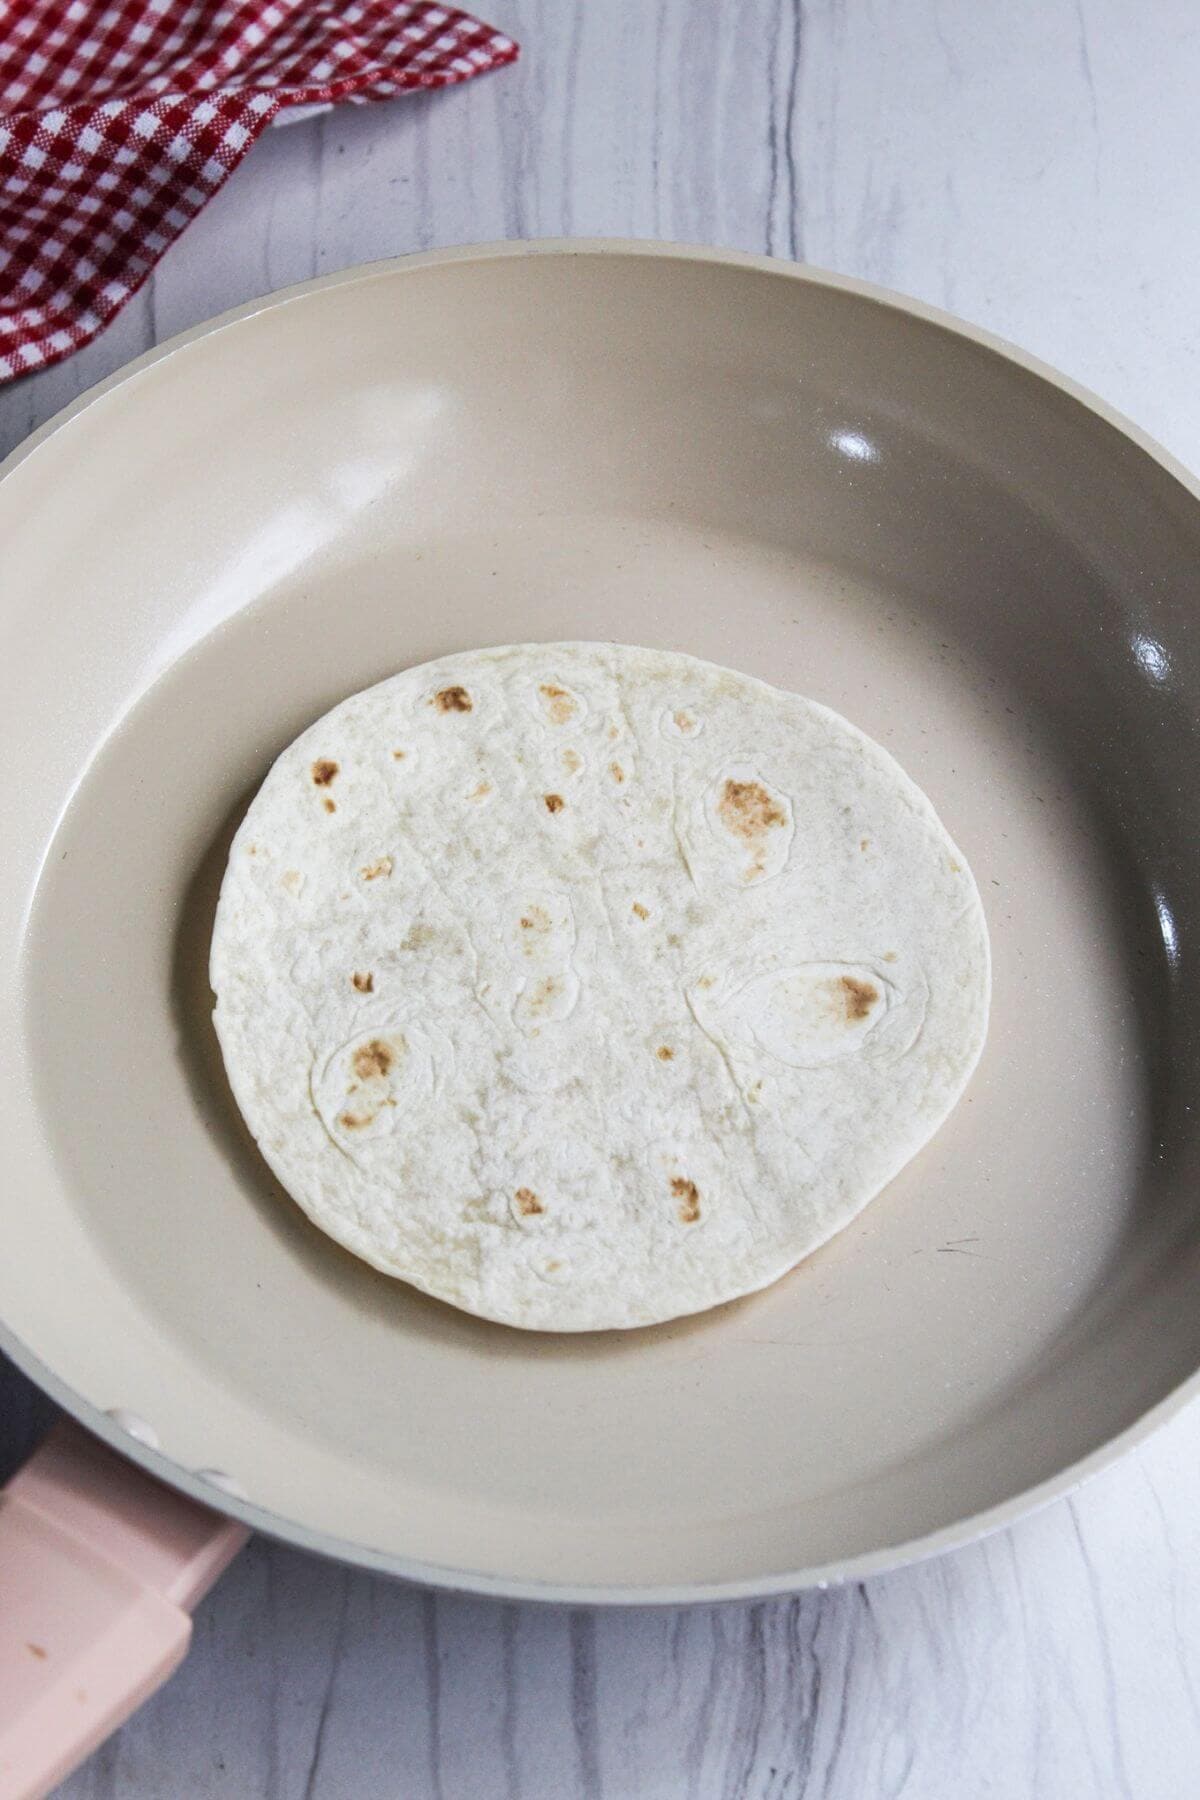 A tortilla is being cooked in a pan for ground pork tacos.